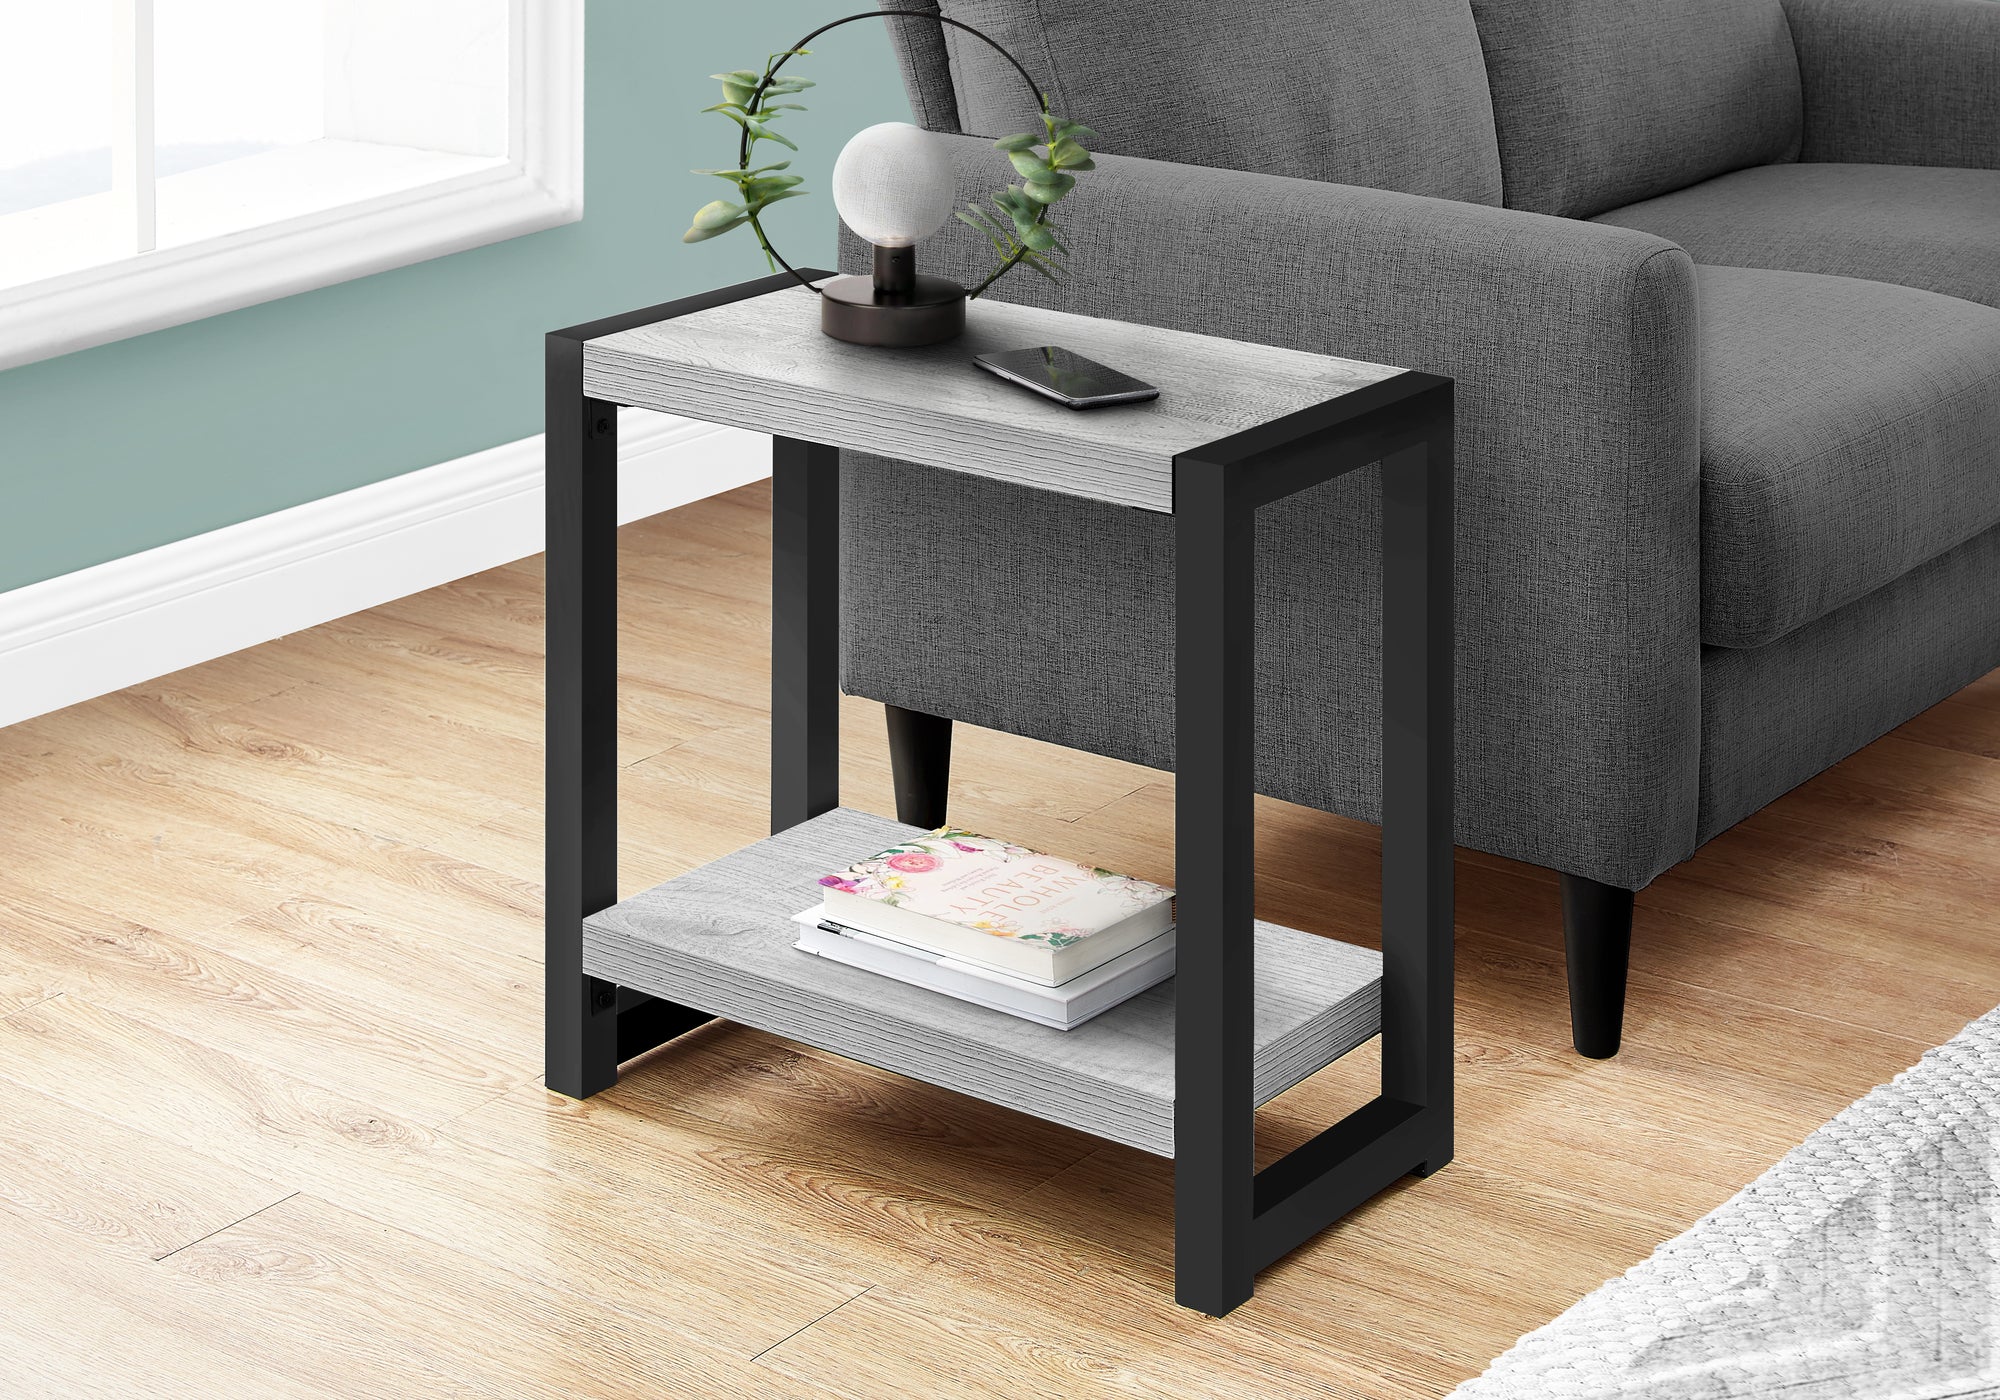 MN-882082    Accent Table, Side, End, Narrow, Small, Living Room, Bedroom, 2 Tier, Metal Legs, Laminate, Grey, Black, Contemporary, Modern